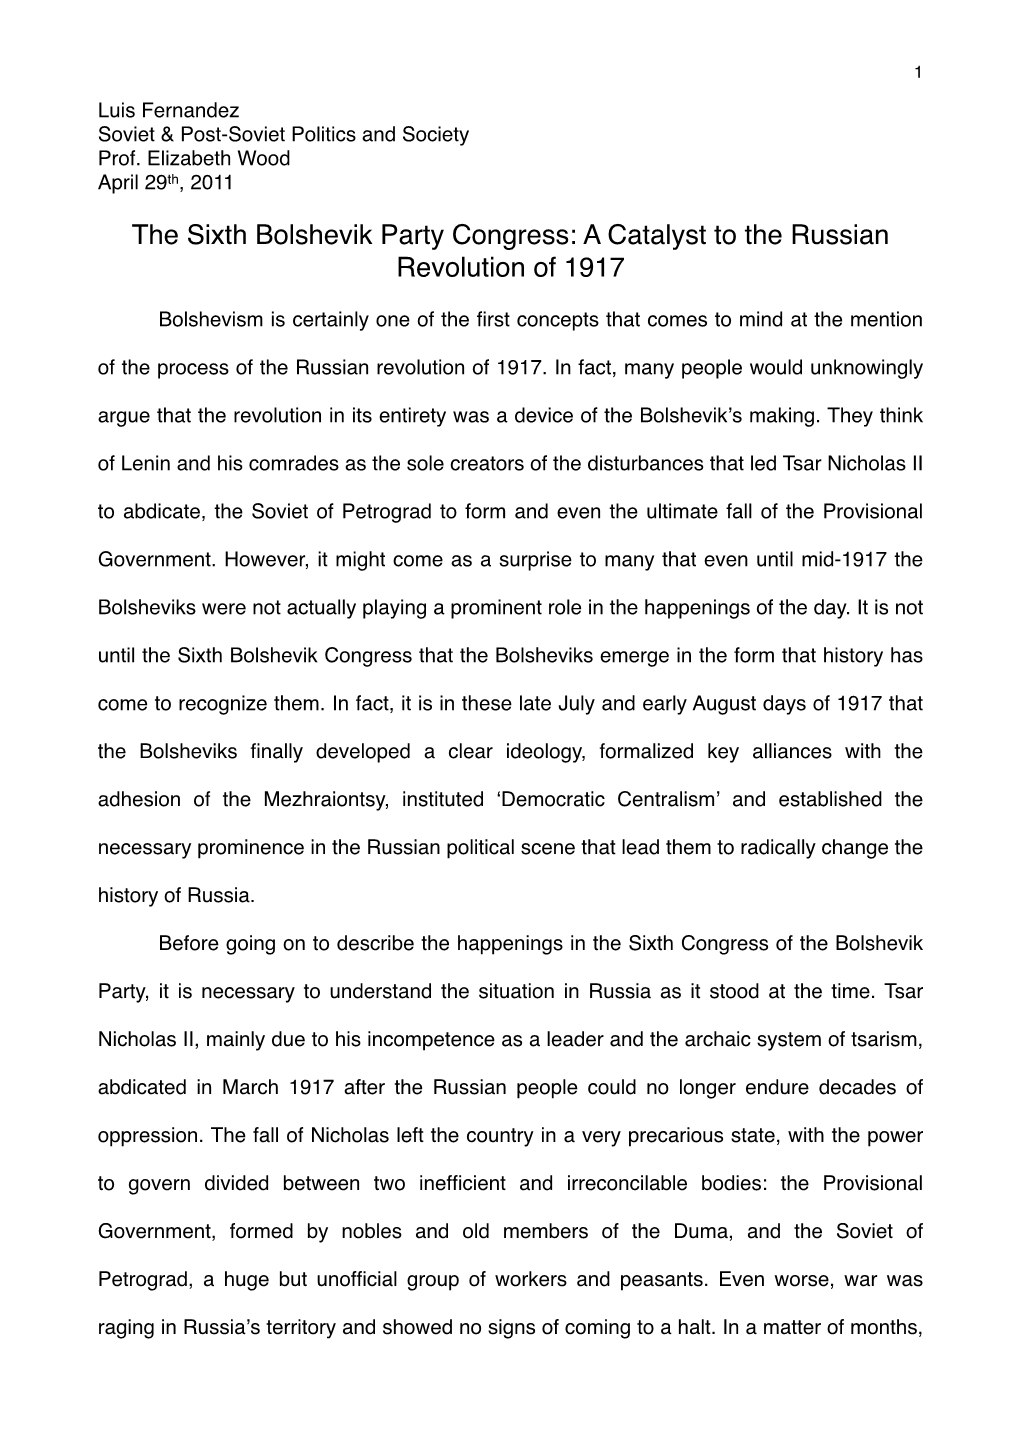 The Sixth Bolshevik Party Congress: a Catalyst to the Russian Revolution of 1917